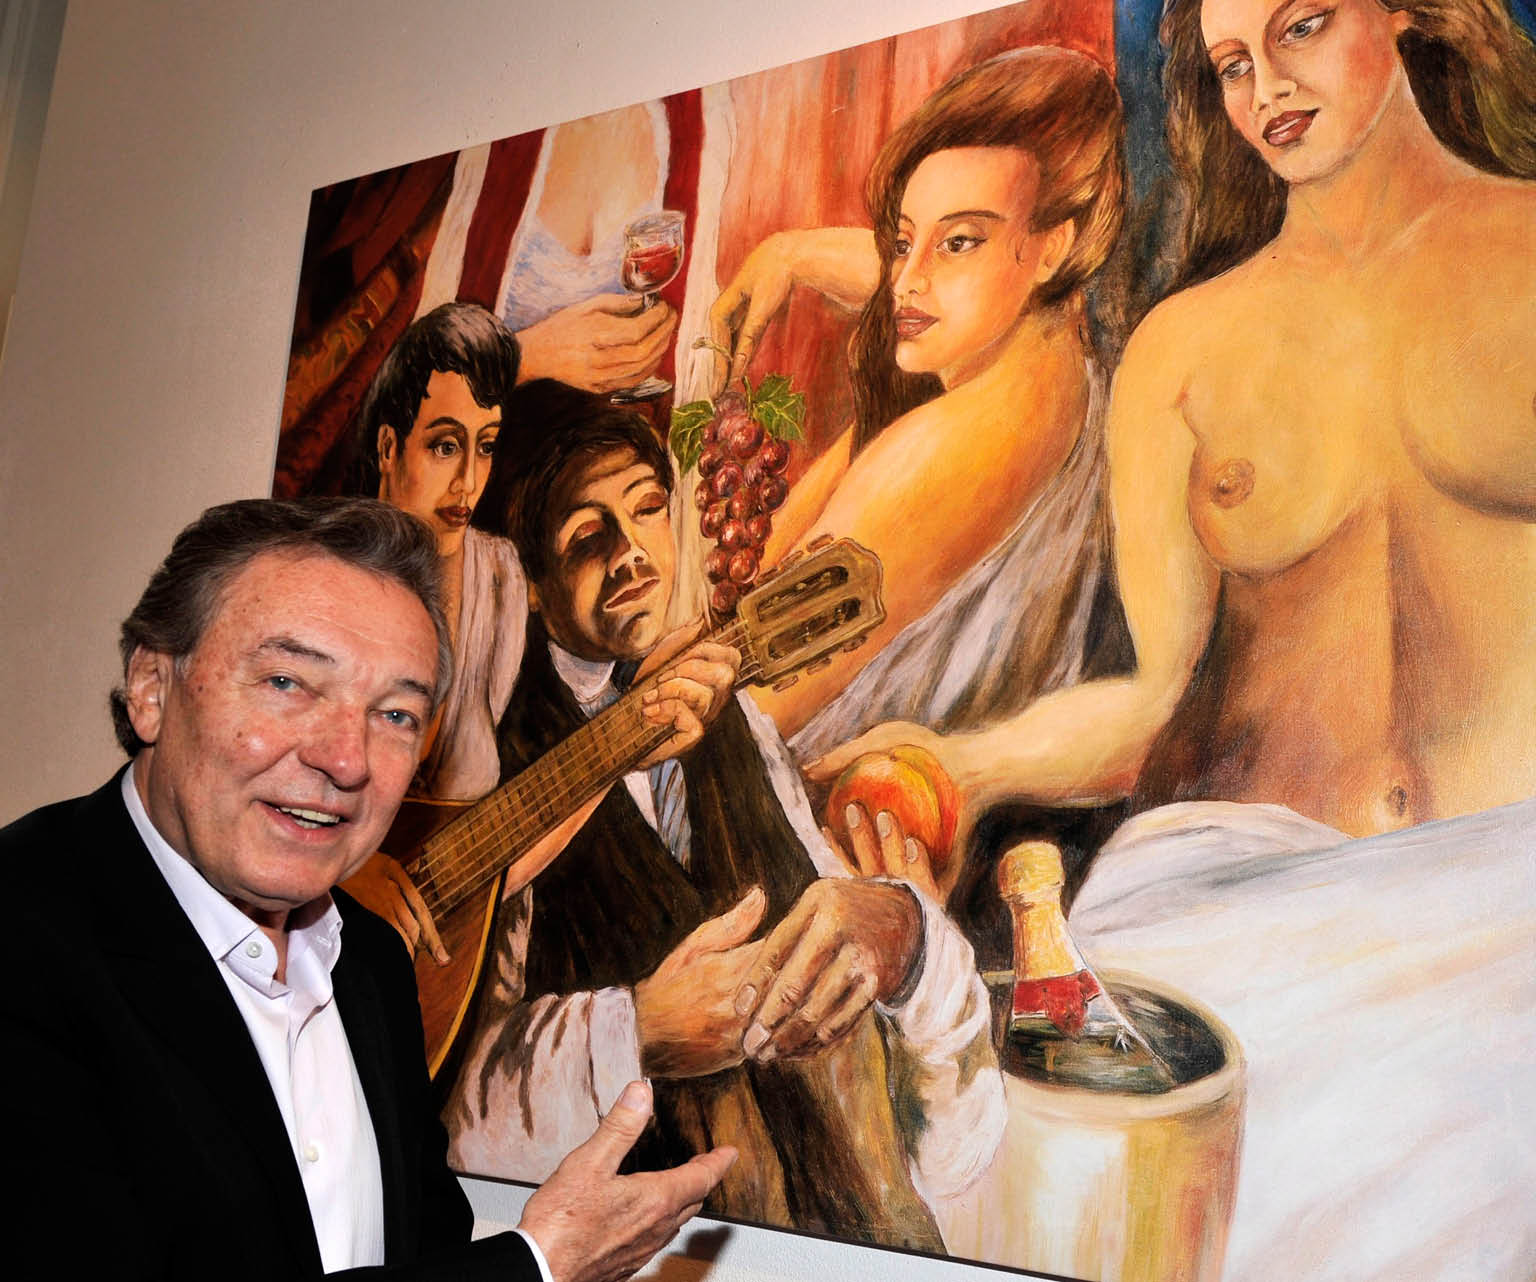 epa02140236 Czech singer Karel Gott poses for photographs in front of his painting entitled 'Sleep, give us a dream' (1999) from his private collection at Mensing Gallery in Munich, Germany, 02 May 2010. The exhibit 'Karel Gott, painter' runs until 10 May 2010.  EPA/URSULA DUEREN